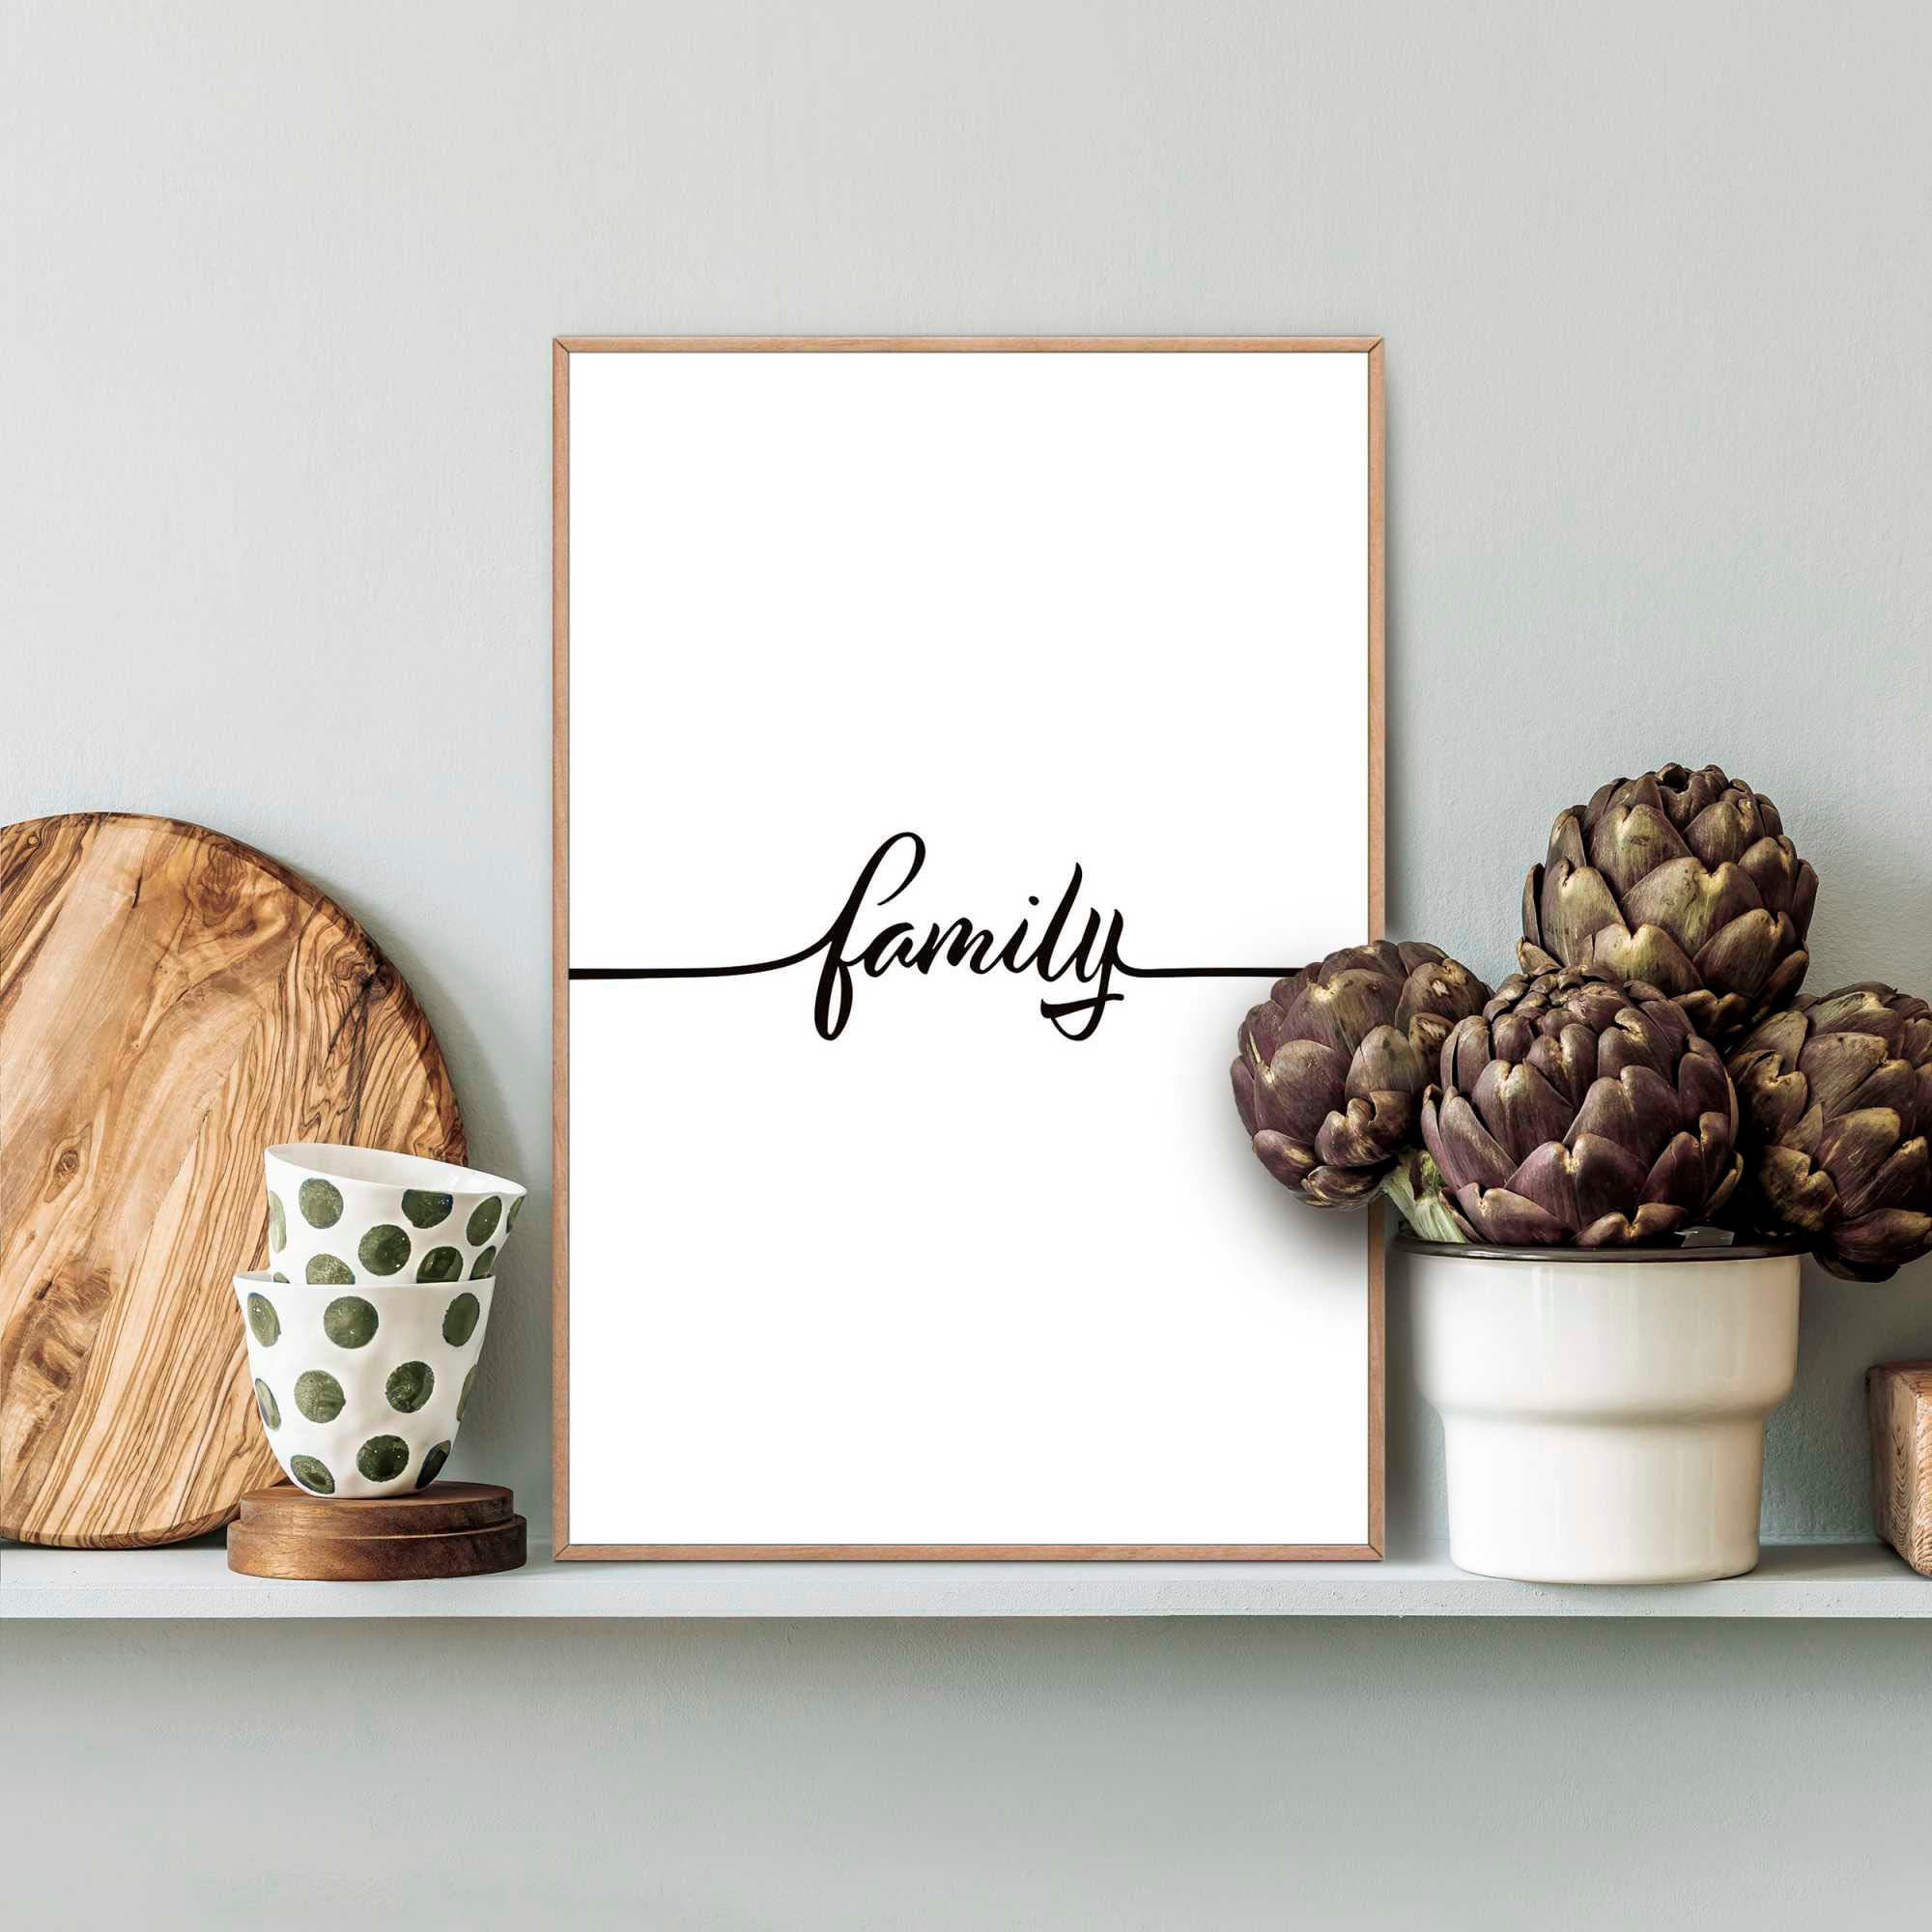 Reinders! Poster »Family« im OTTO Online Shop